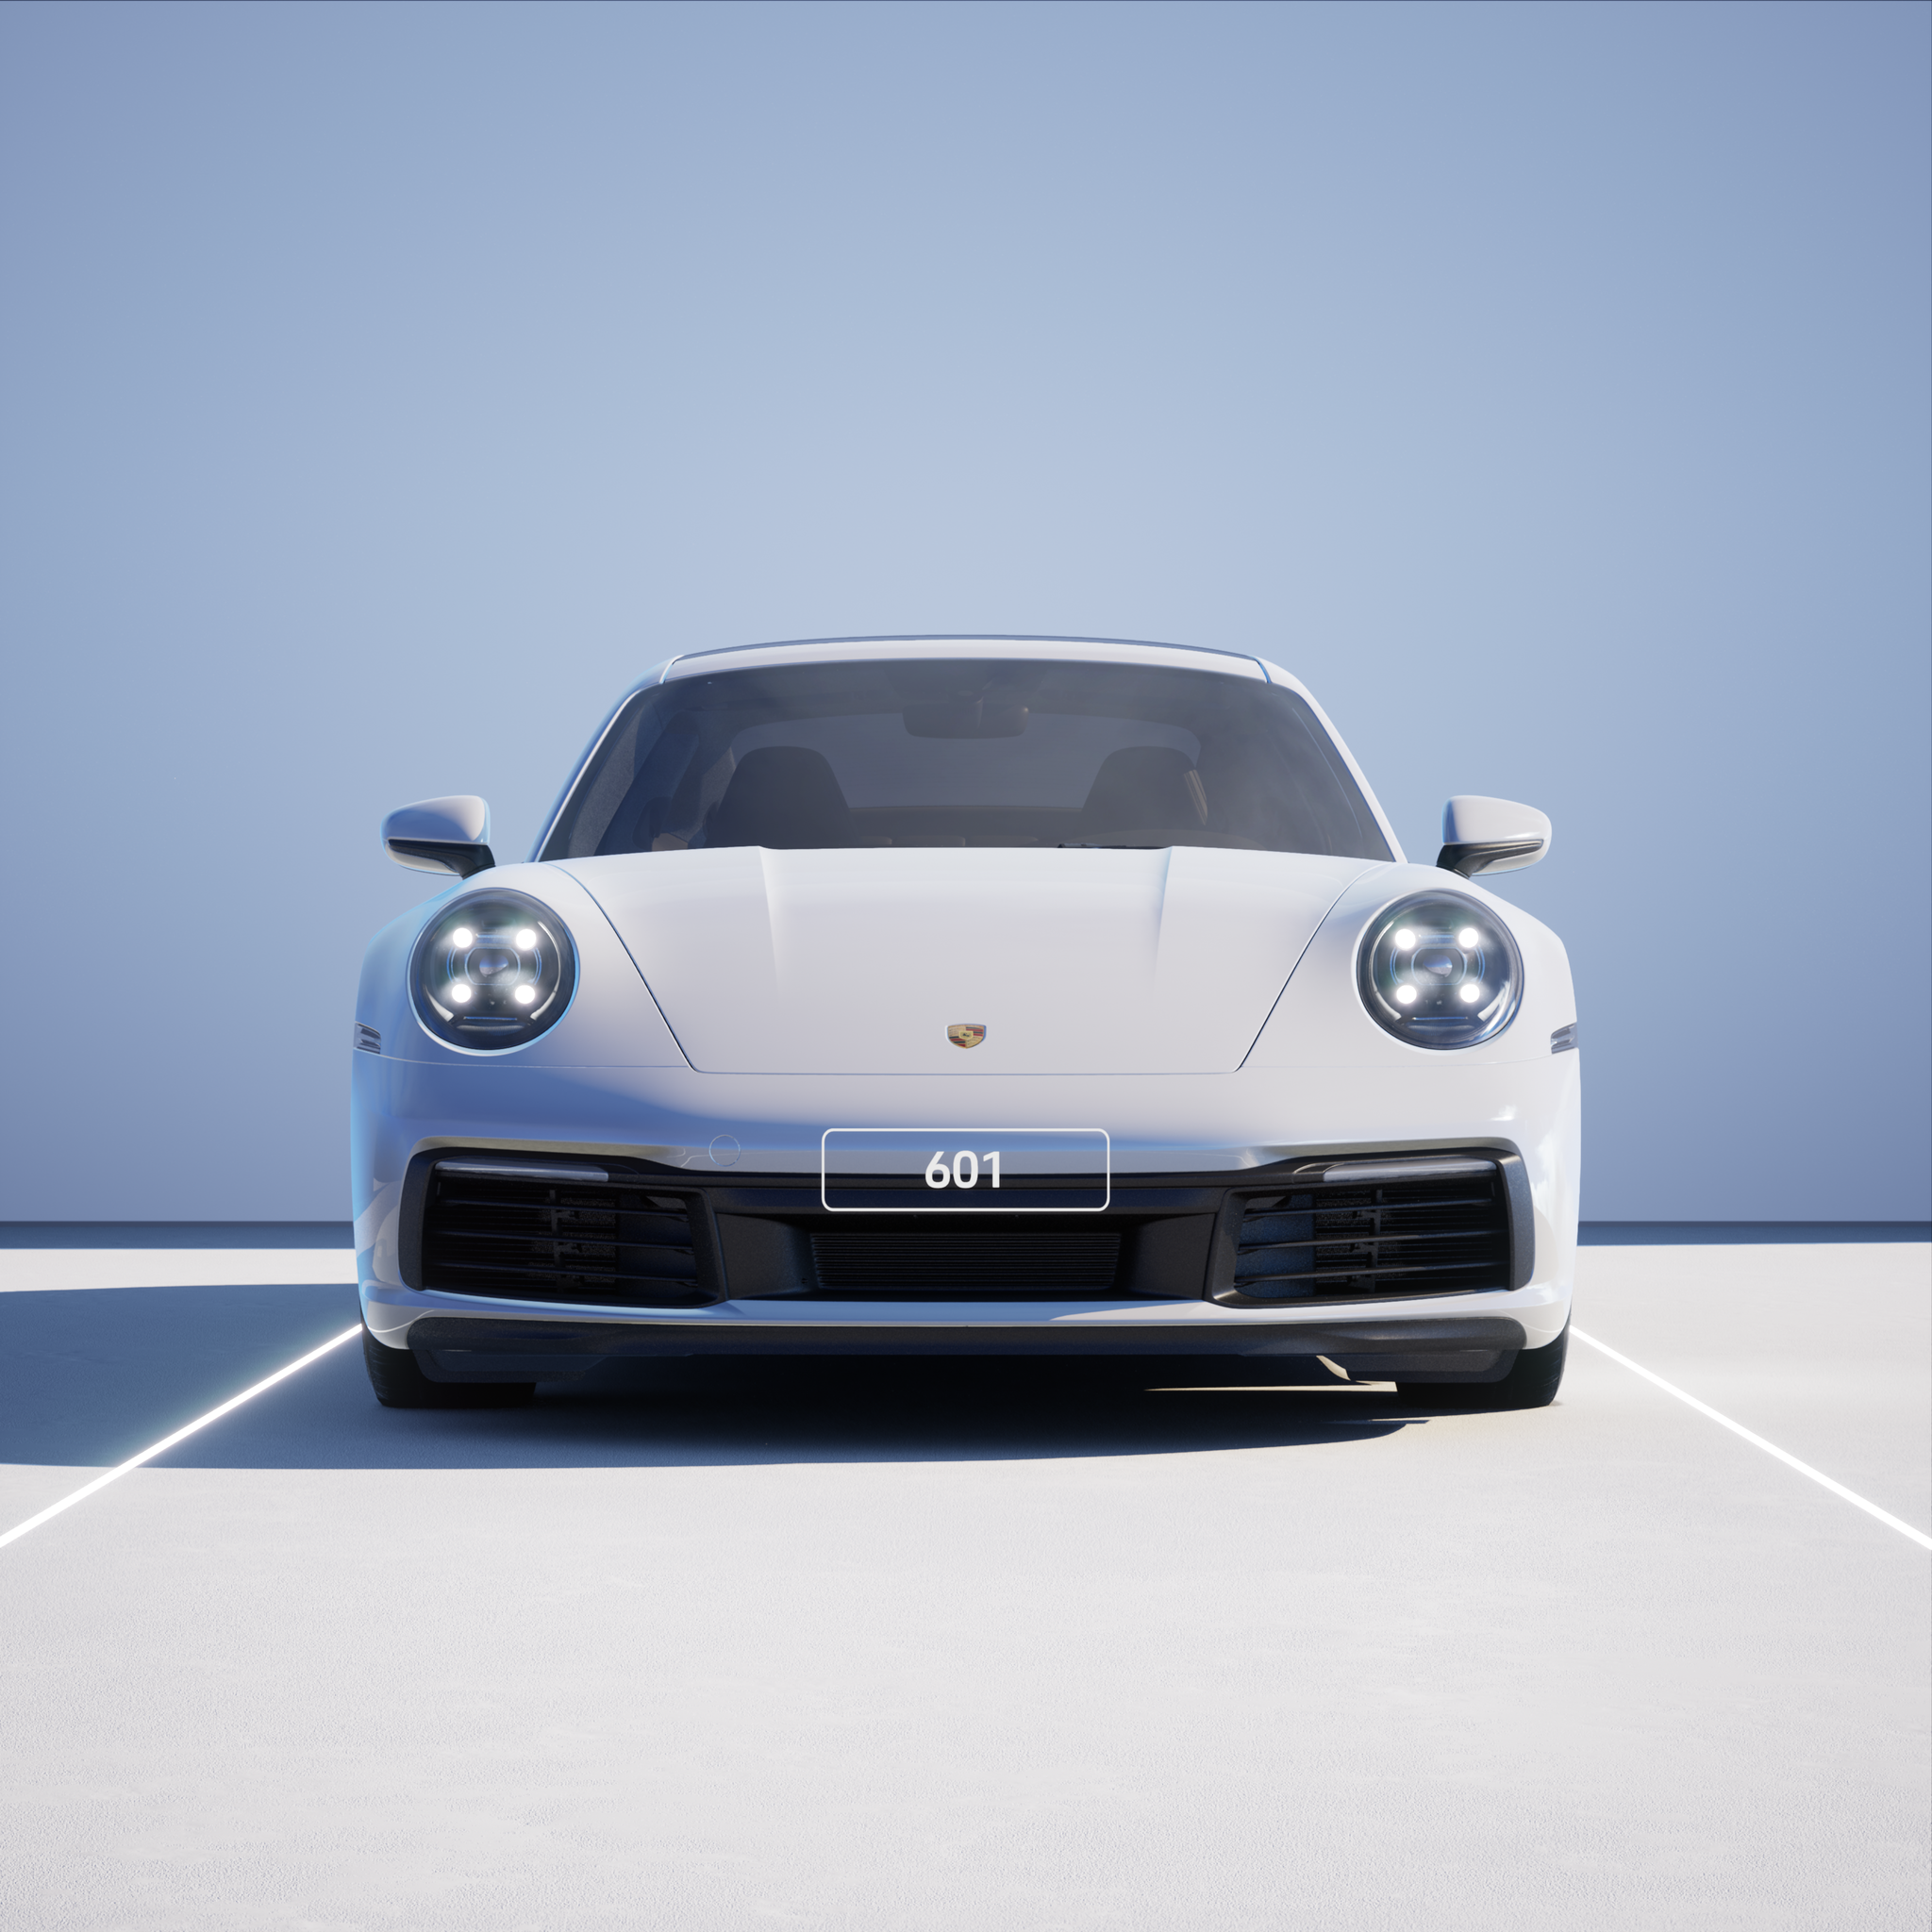 The PORSCHΞ 911 601 image in phase